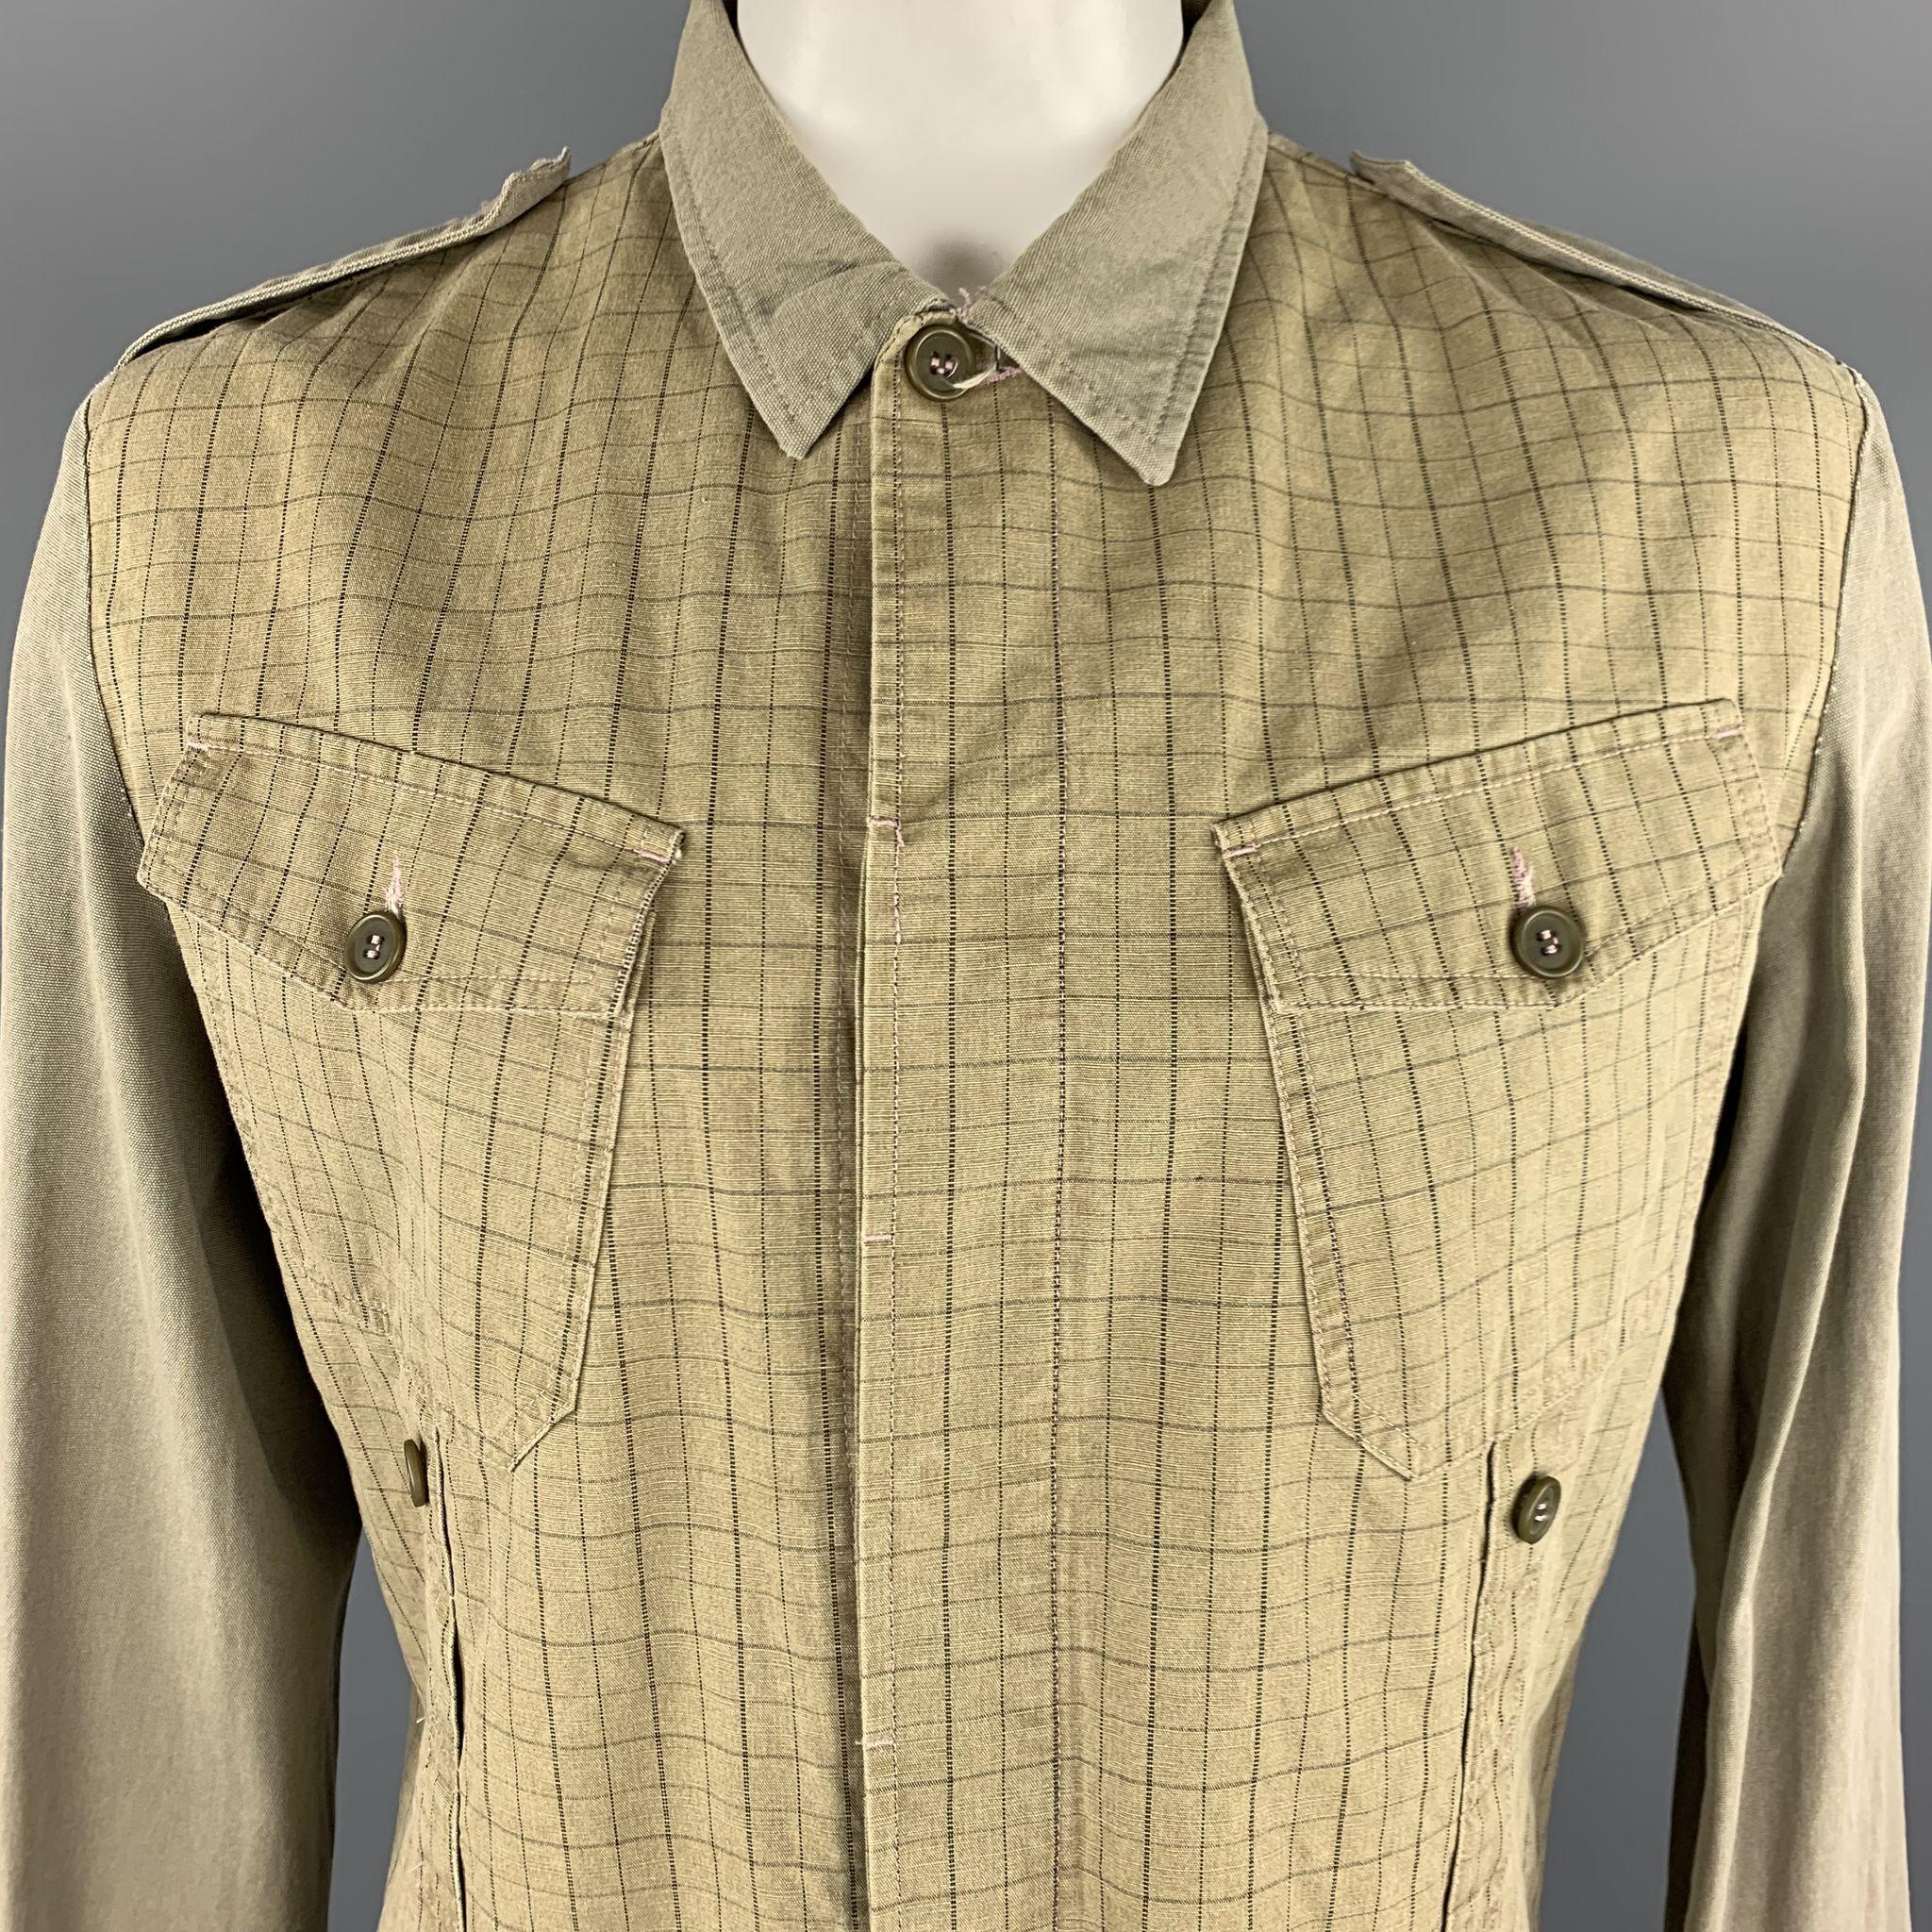 GRIFFIN Jacket comes in khaki tones in a cotton material, mixed fabrics, with epaulettes, patch pockets, hidden buttons at closure, buttoned cuffs, unlined. Made in Italy.
 
Excellent  Pre-Owned Condition.
Marked: XL
 
Measurements:
 
Shoulder: 19